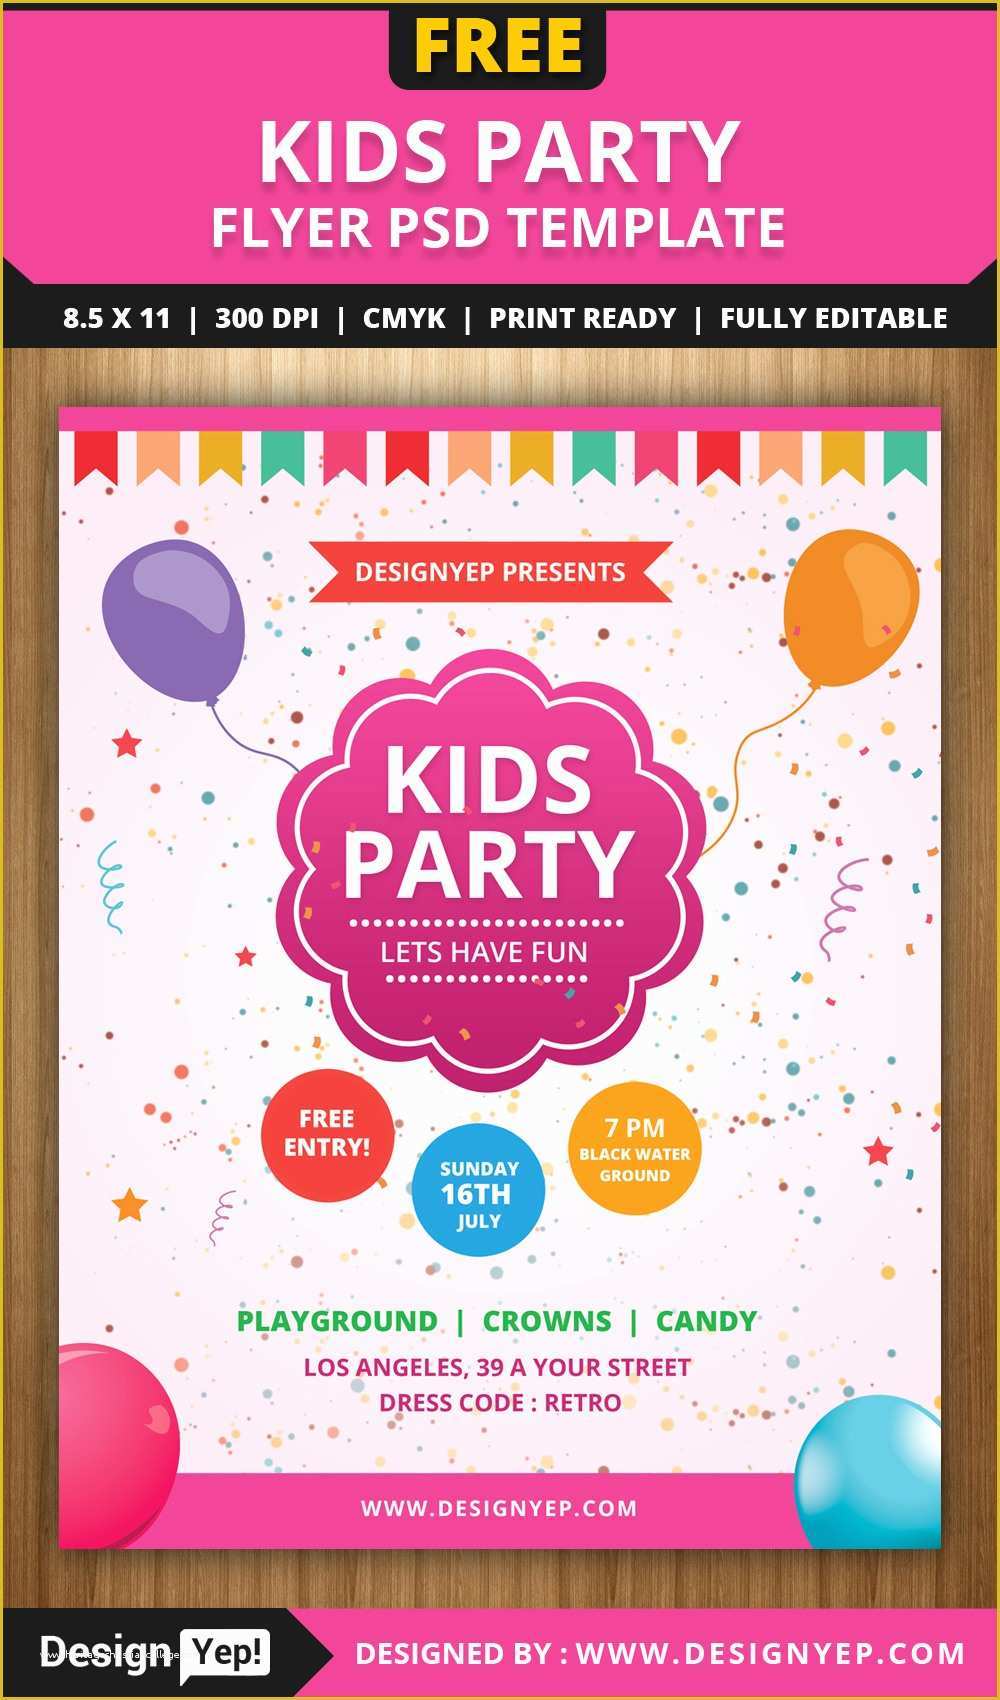 Free event Planning Flyer Templates Of Free Kids Party Flyer Psd Template Designyep